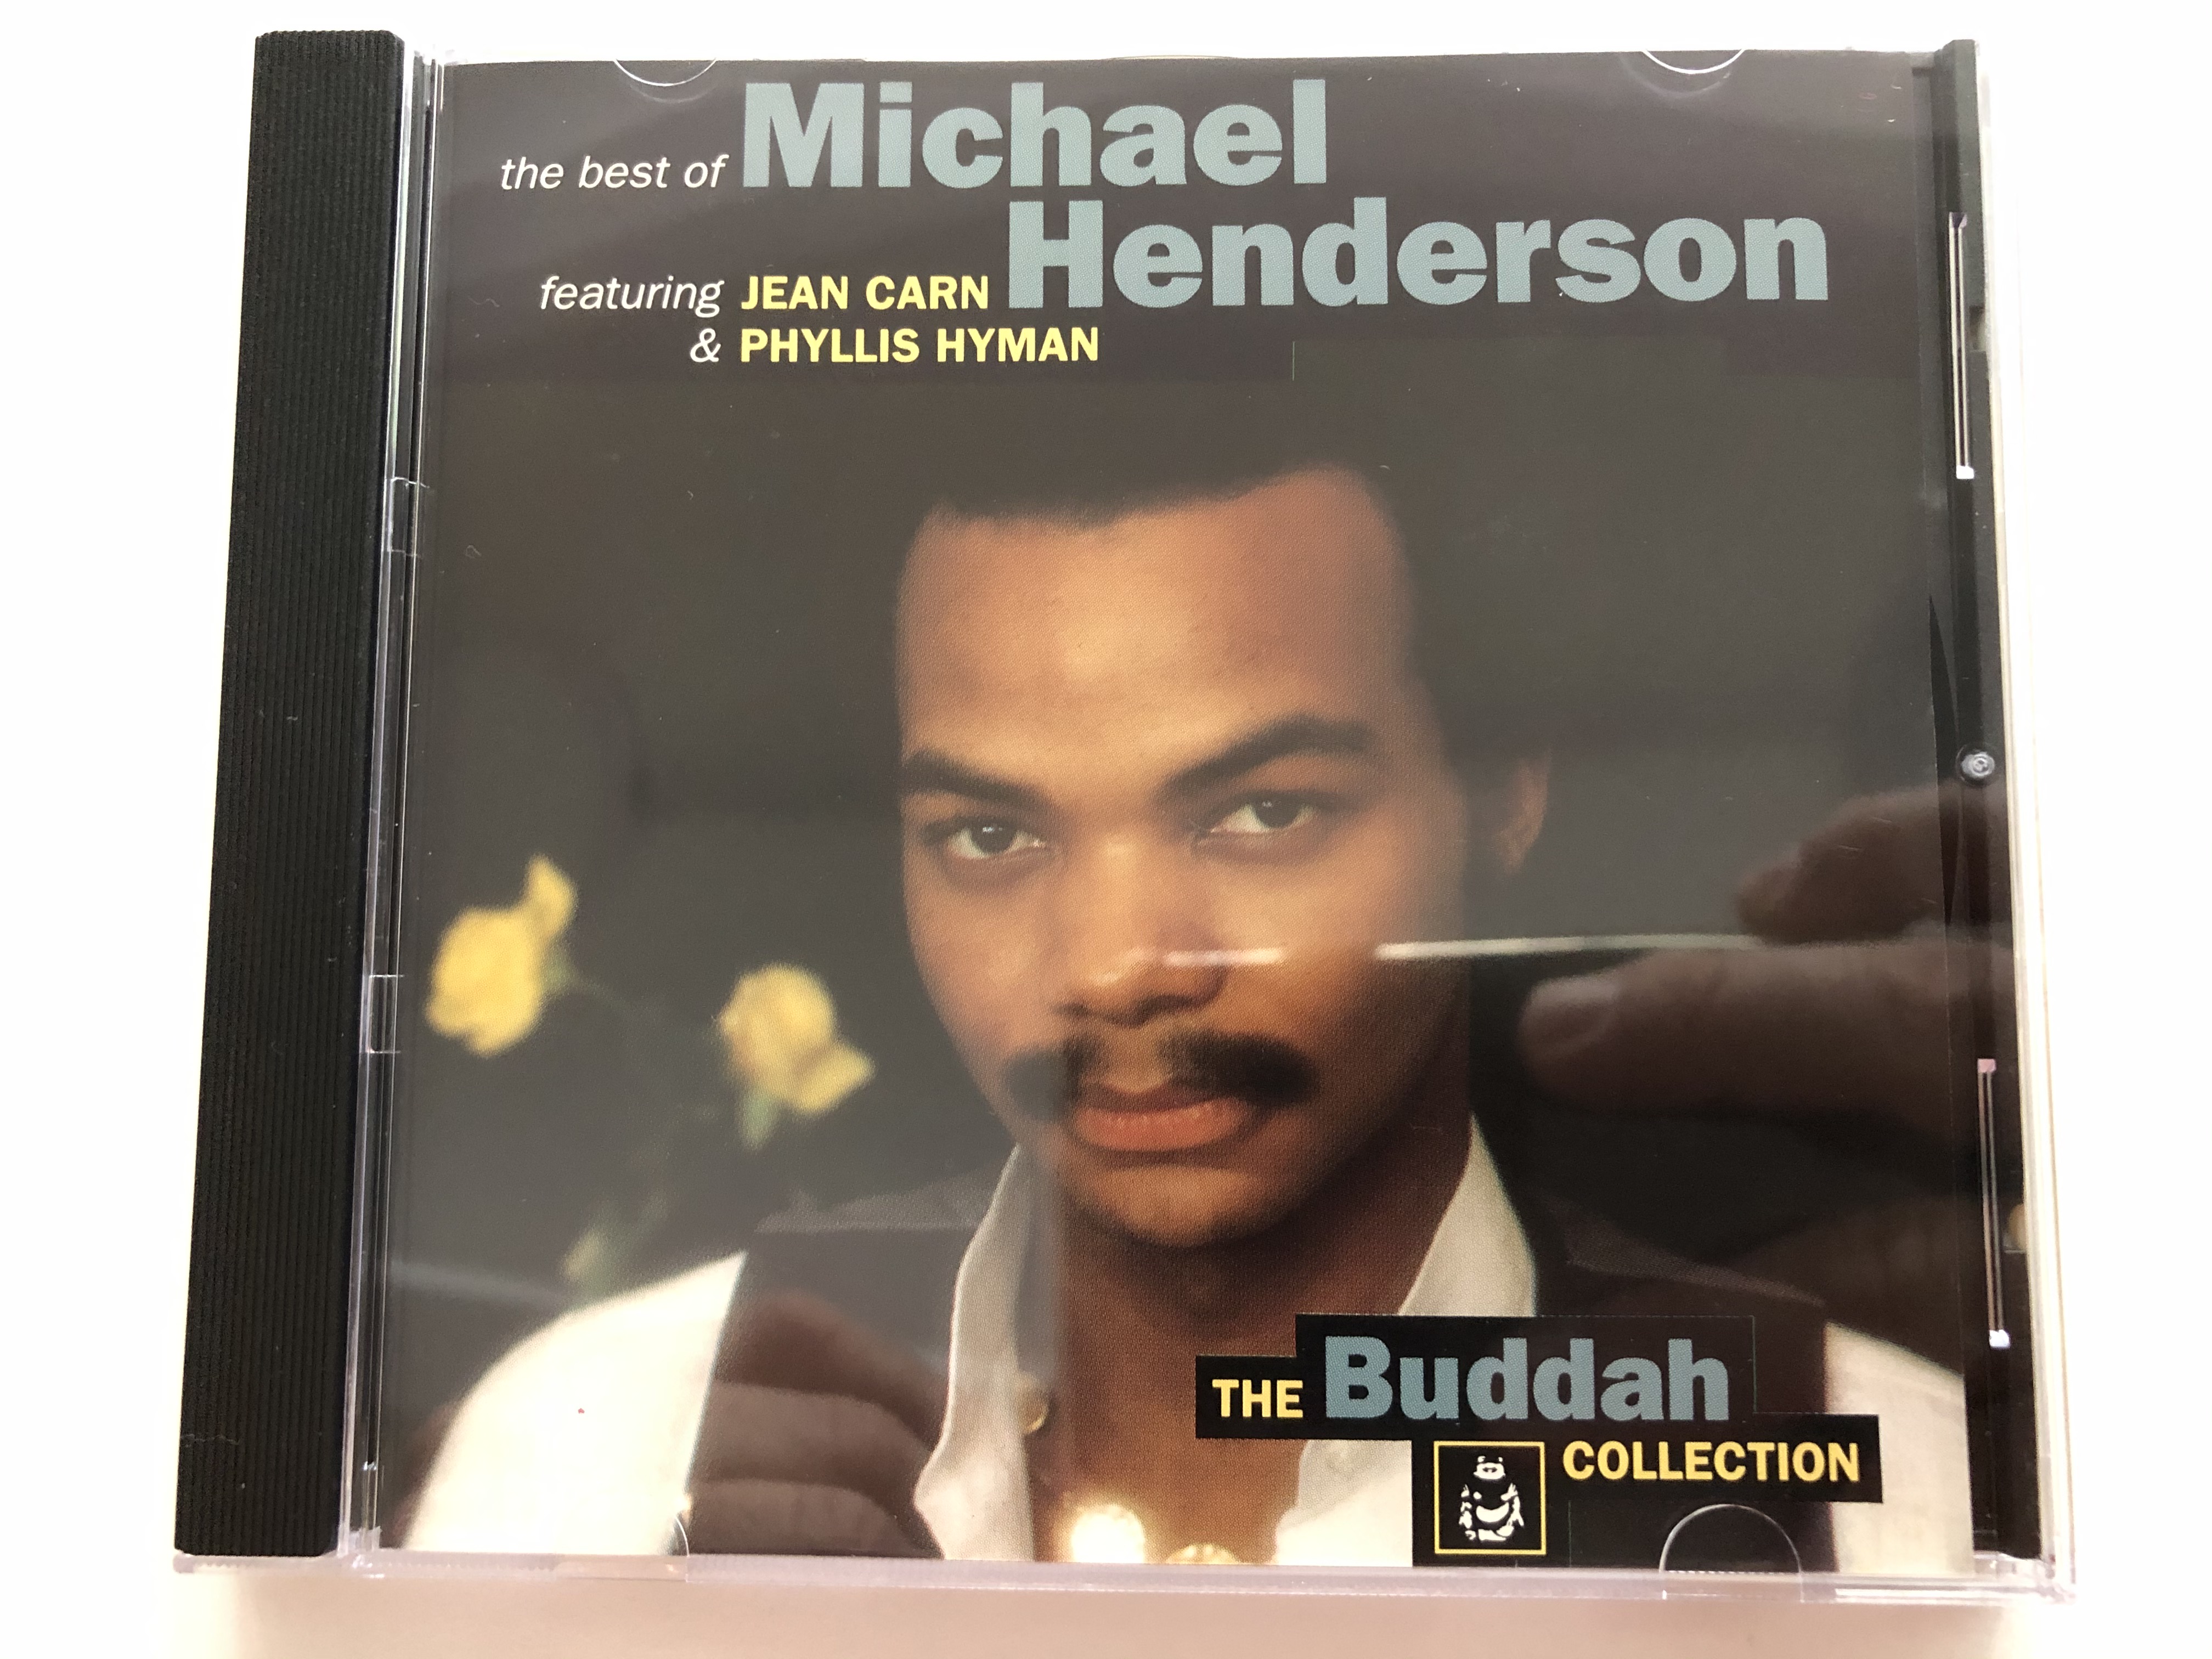 the-best-of-michael-henderson-featuring-jean-carn-phyllis-hyman-the-buddah-collection-sequel-records-audio-cd-1990-nex-cd-117-1-.jpg